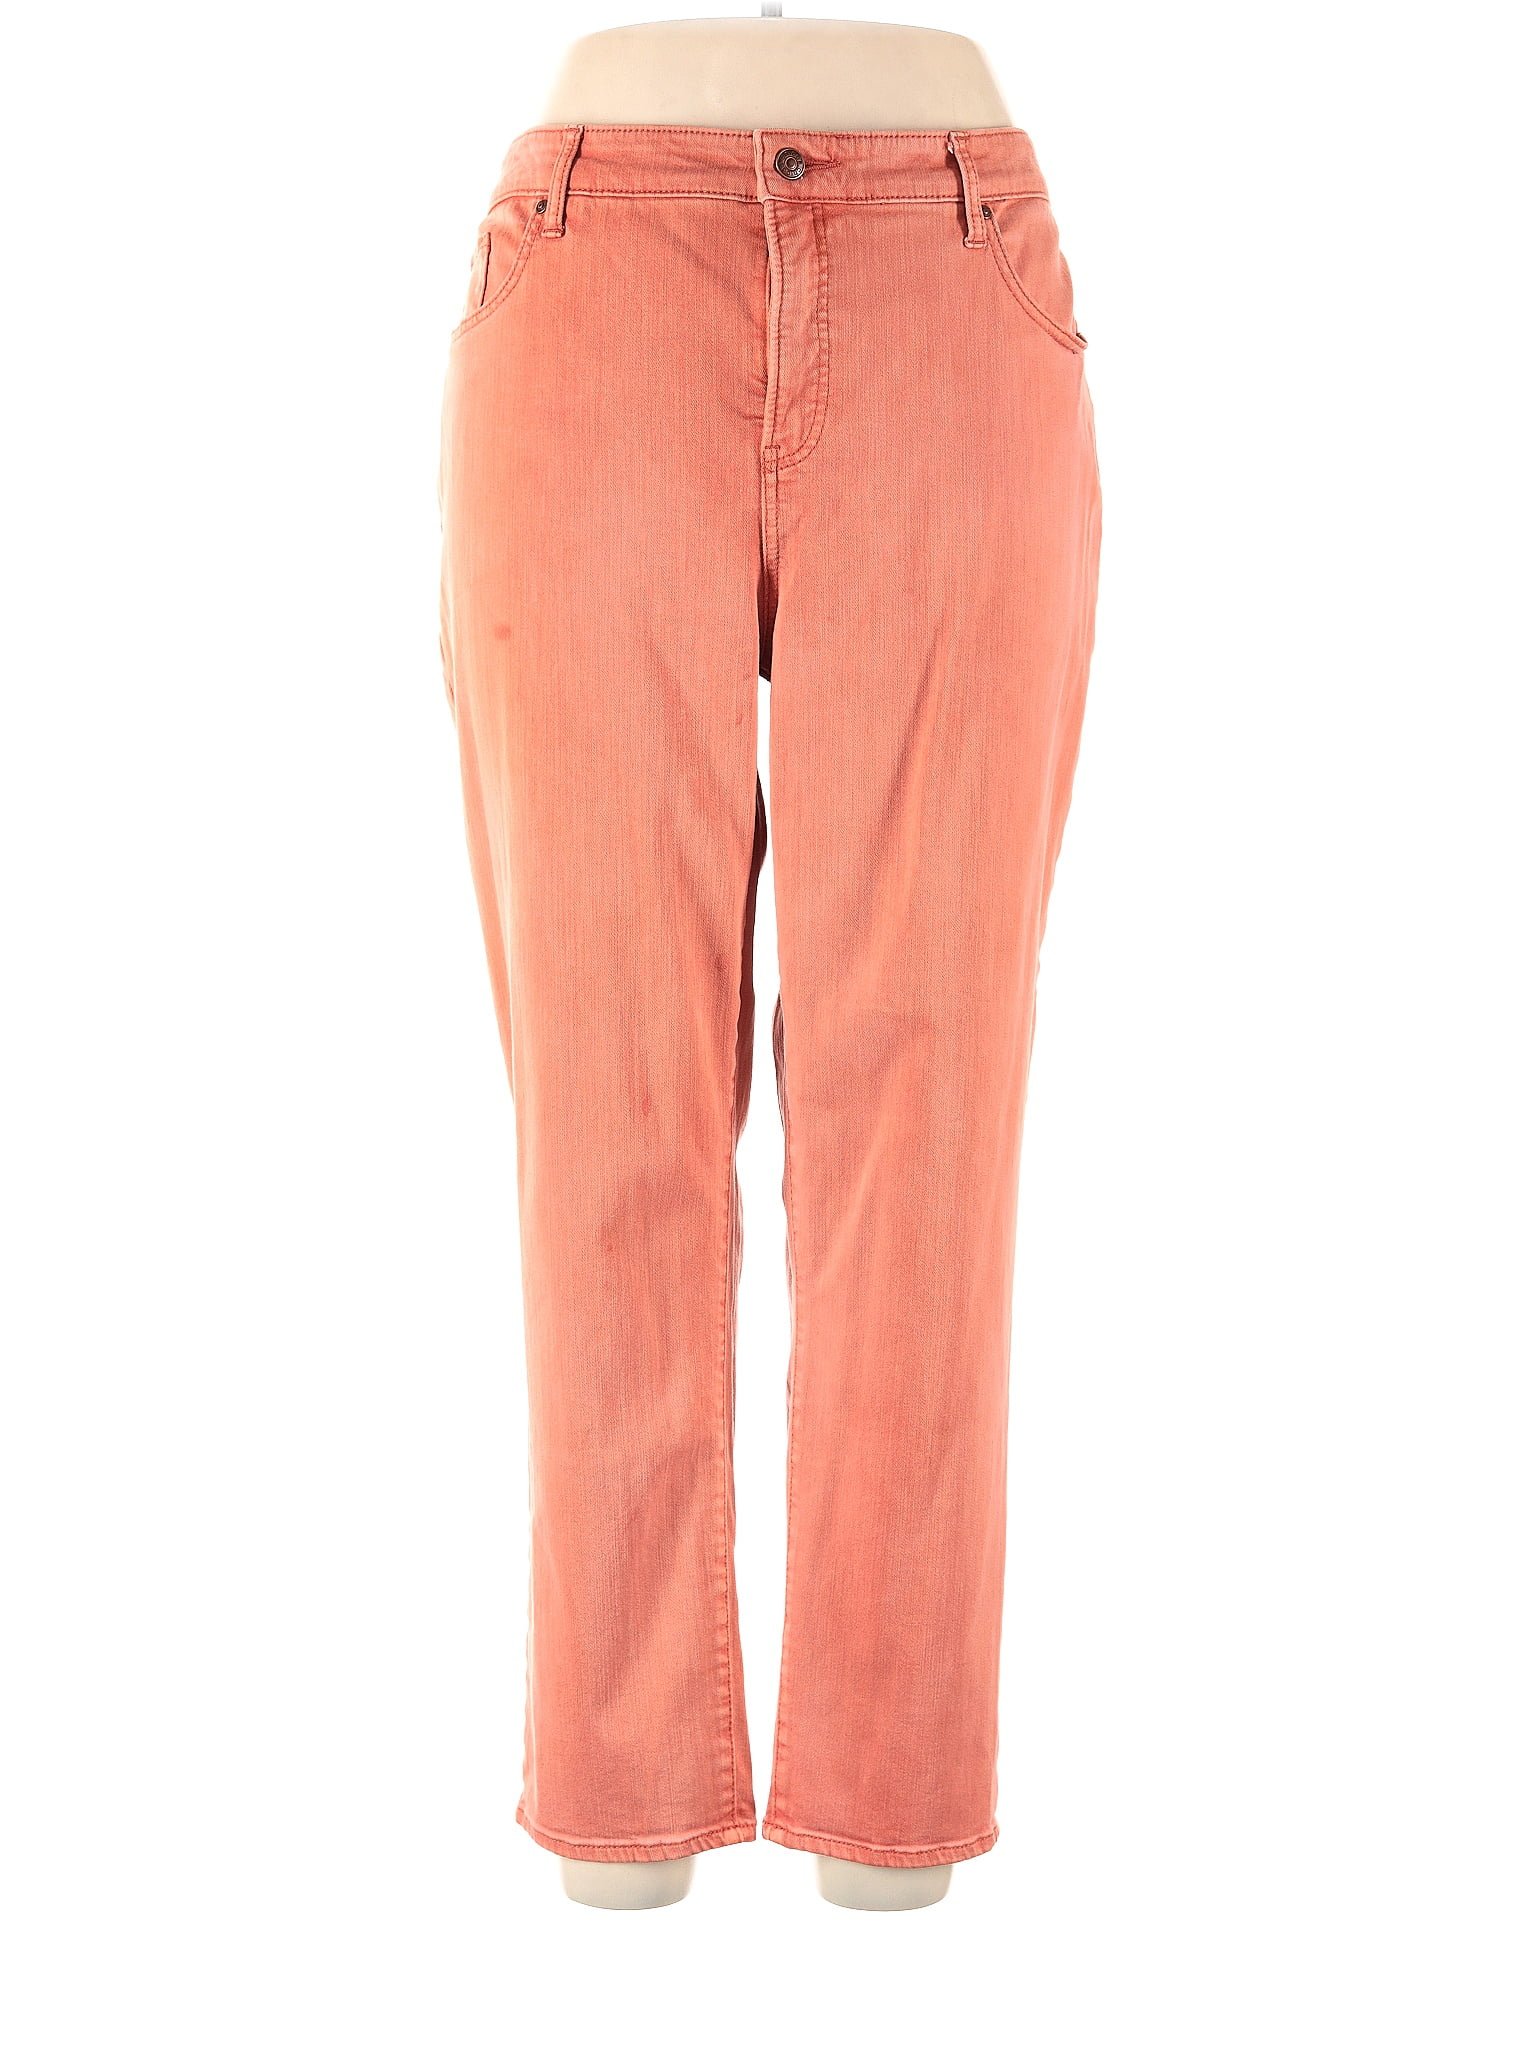 So Slimming by Chico's Solid Pink Orange Jeans Size XL (3) - 72% off